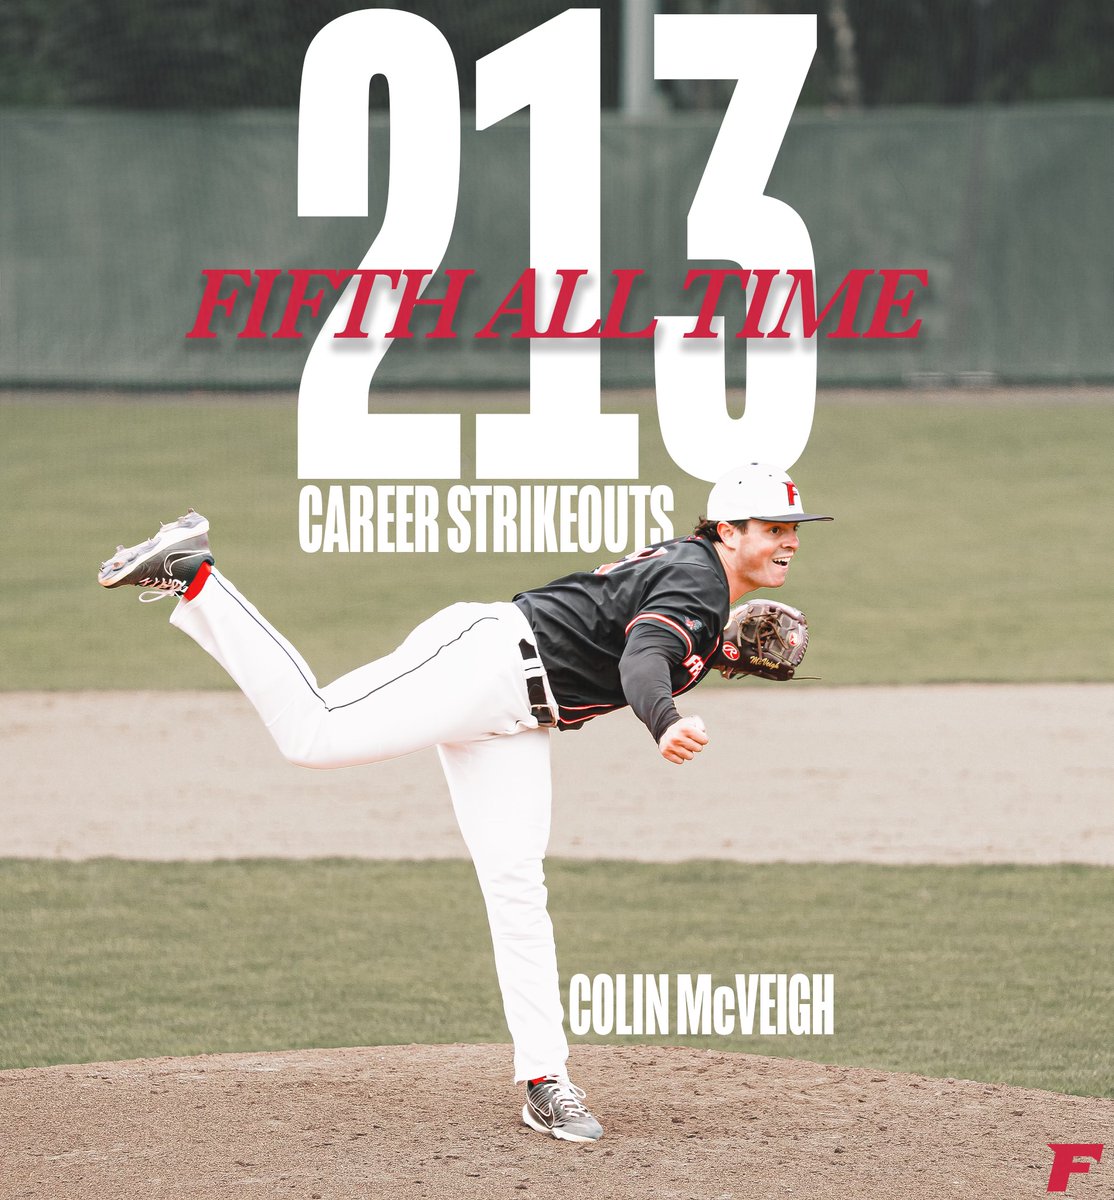 𝗧𝗢𝗣 - 5⃣ ‼️ McVeigh is moving 🔼 in the record books #WeAreStags🤘⚾️